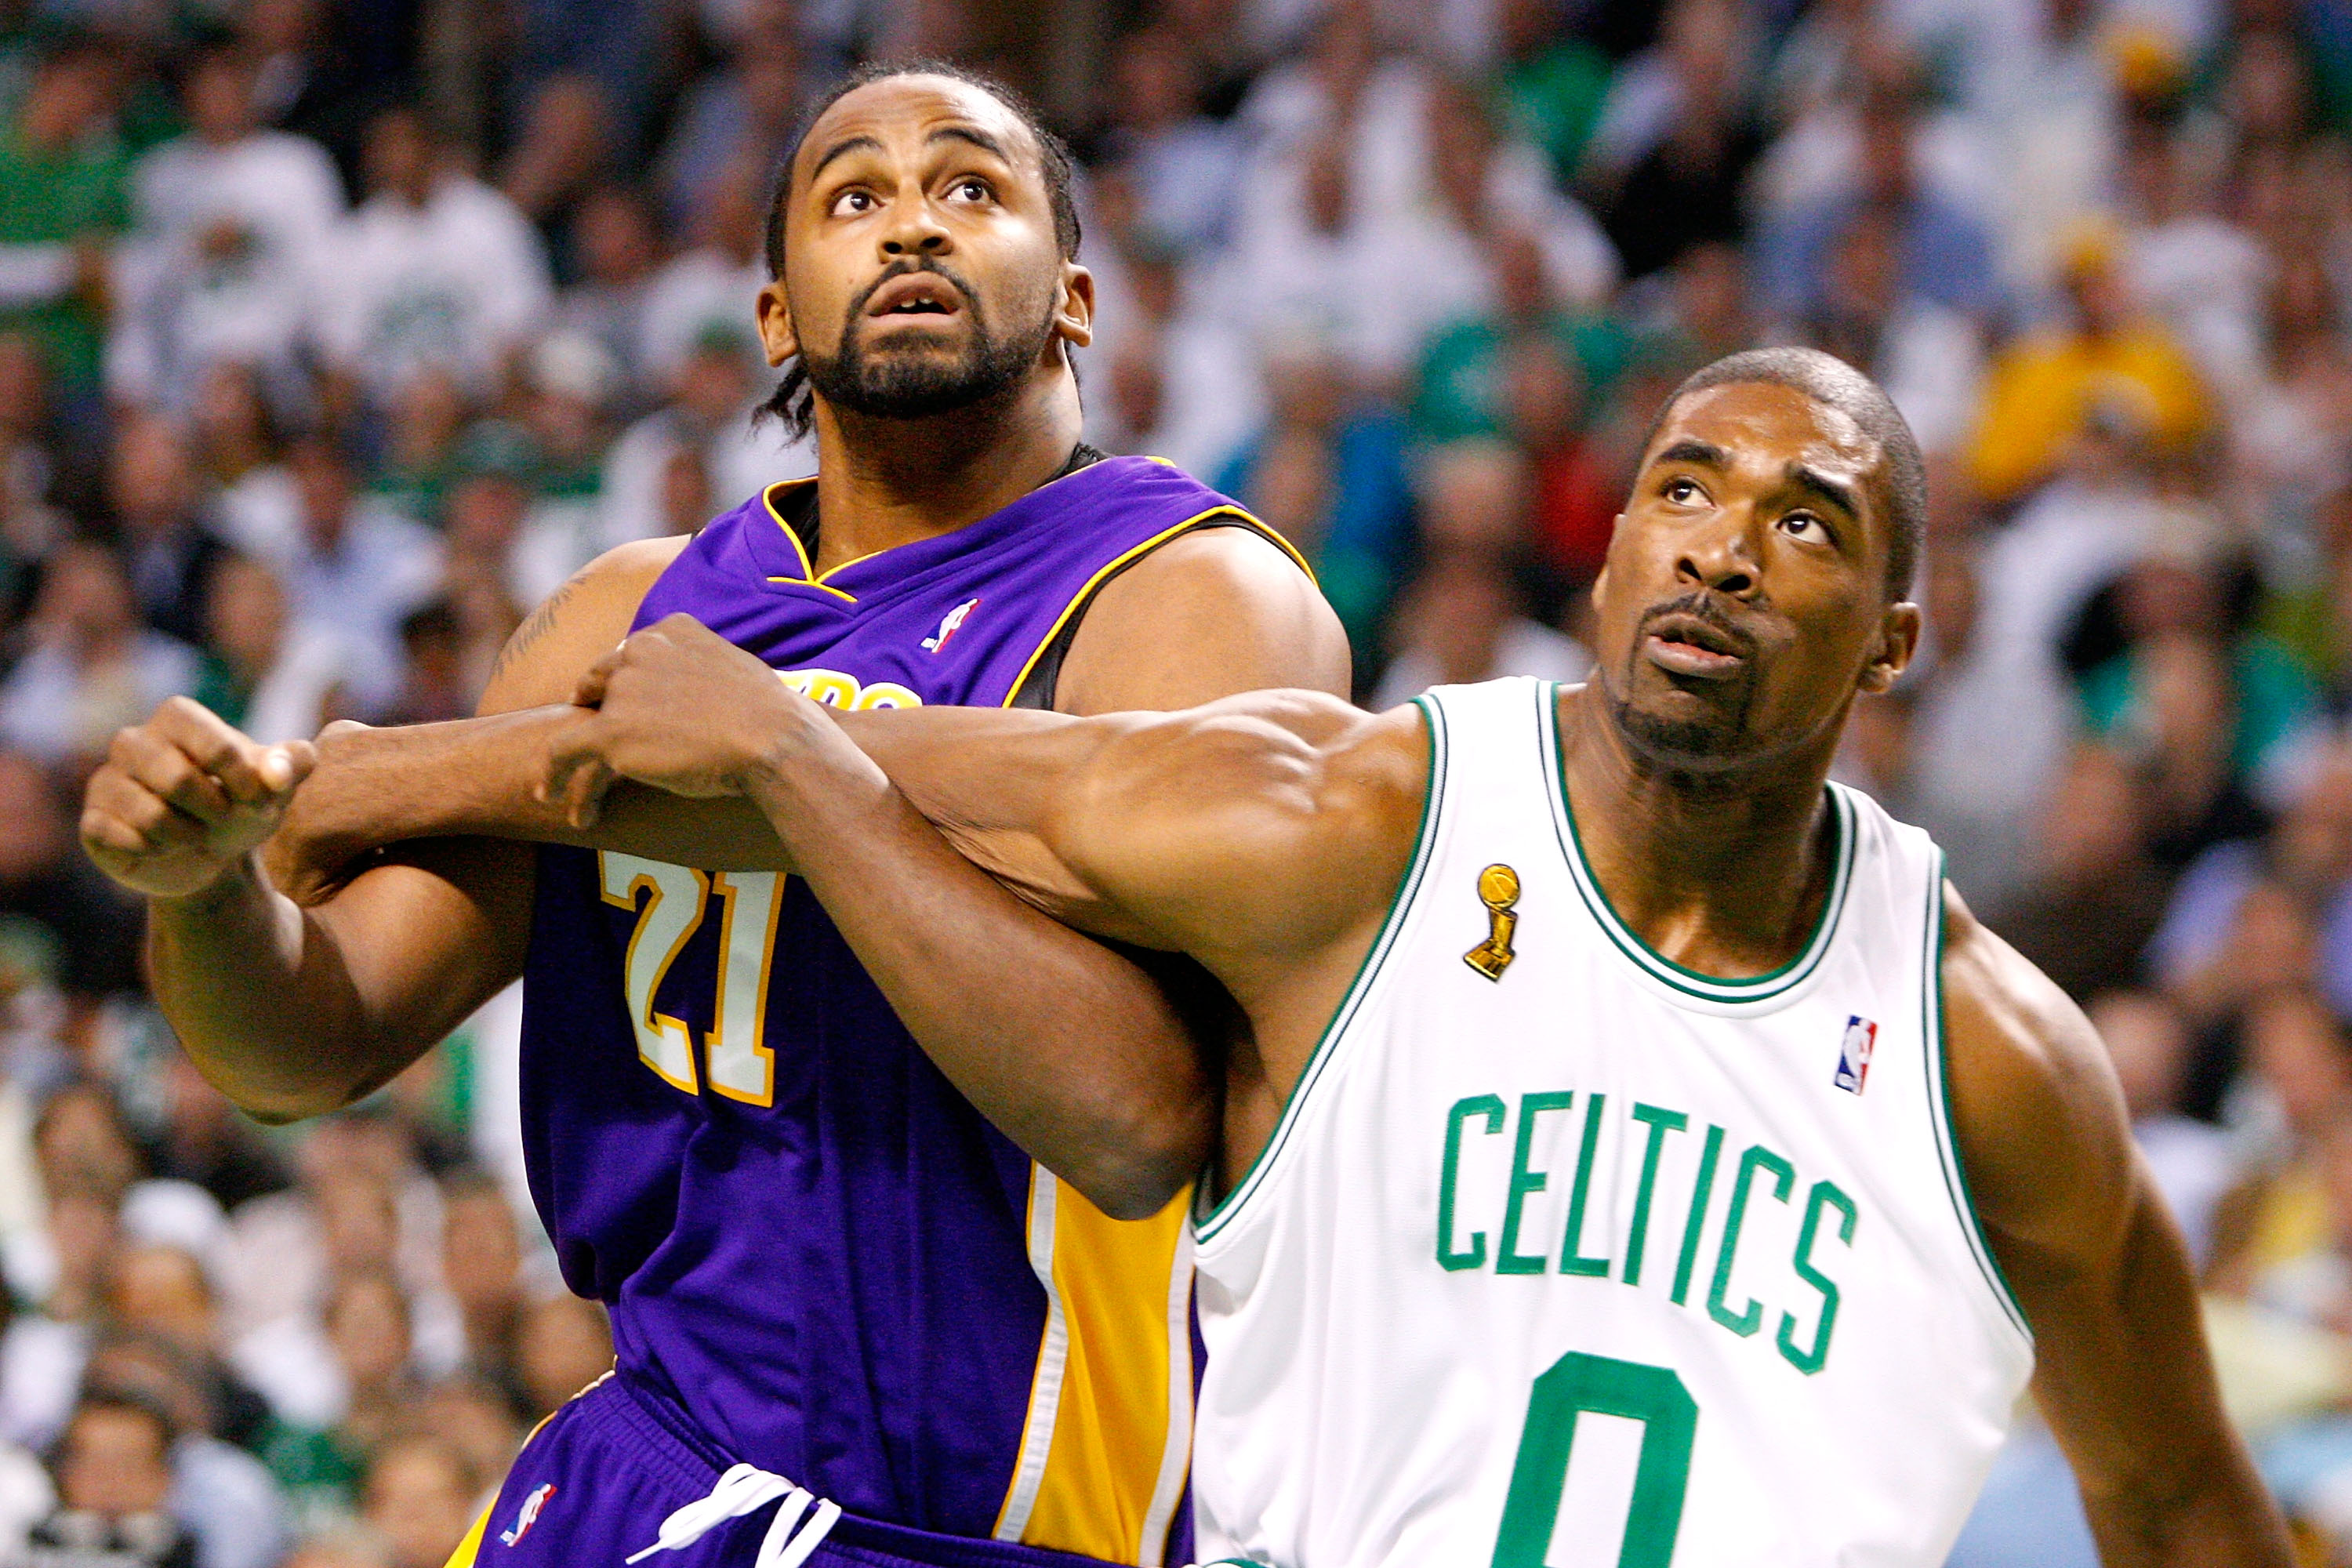 Ronny Turiaf of the Los Angeles Lakers and Leon Powe of the Boston Celtics battle for position.